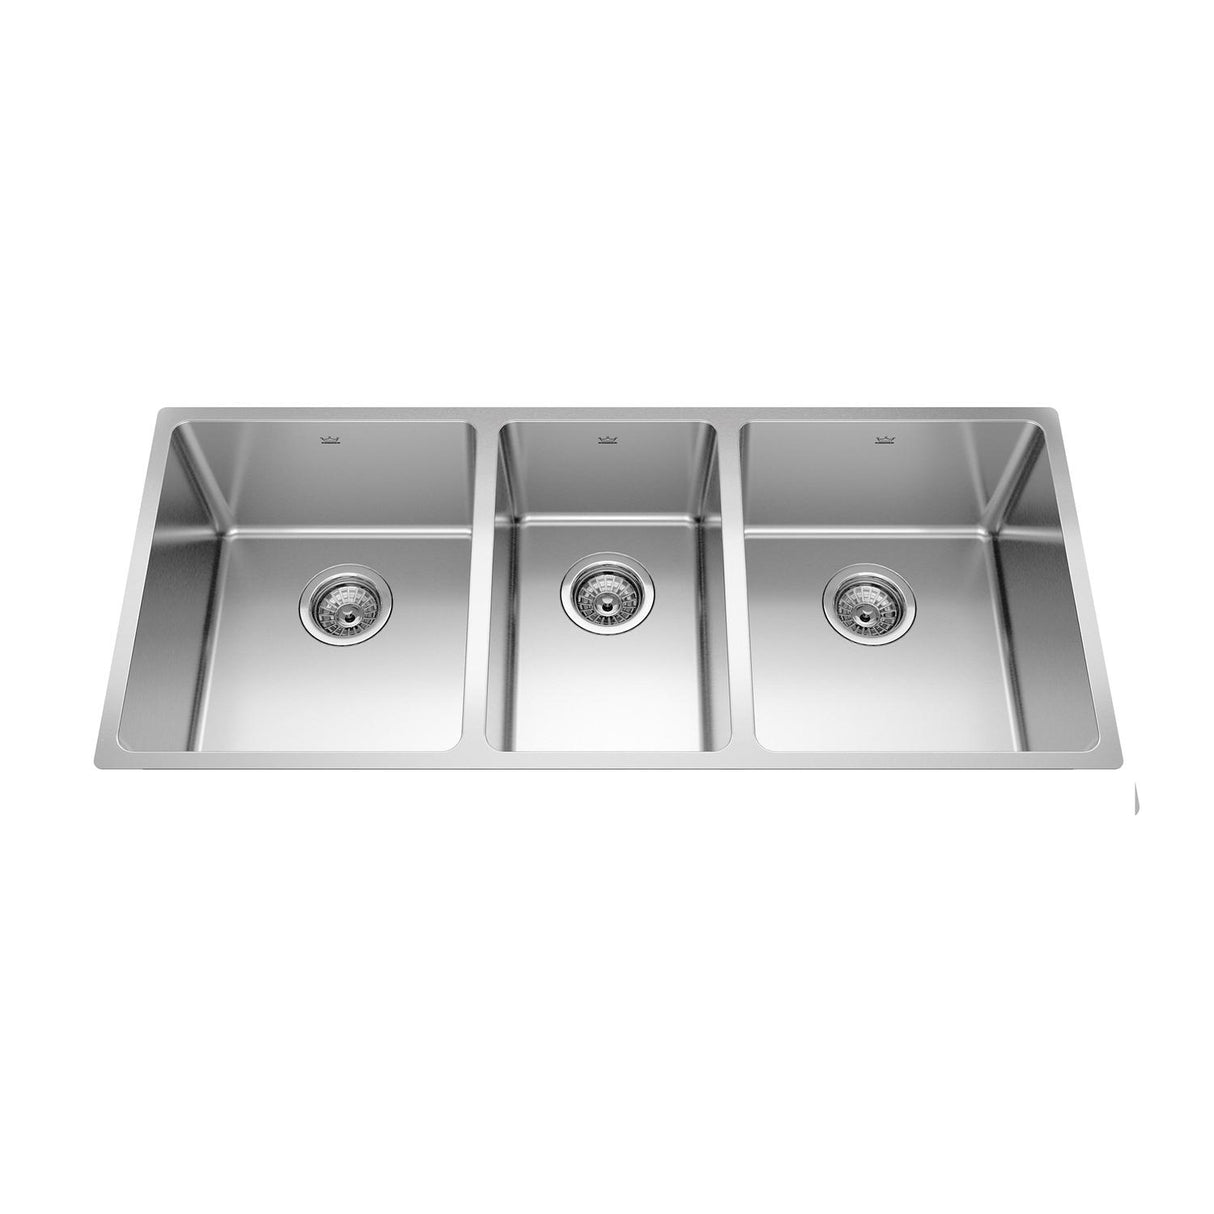 KINDRED BTU1841-9N Brookmore 41.5-in LR x 16.6-in FB x 9-in DP Undermount Triple Bowl Stainless Steel Sink In Commercial Satin Finish